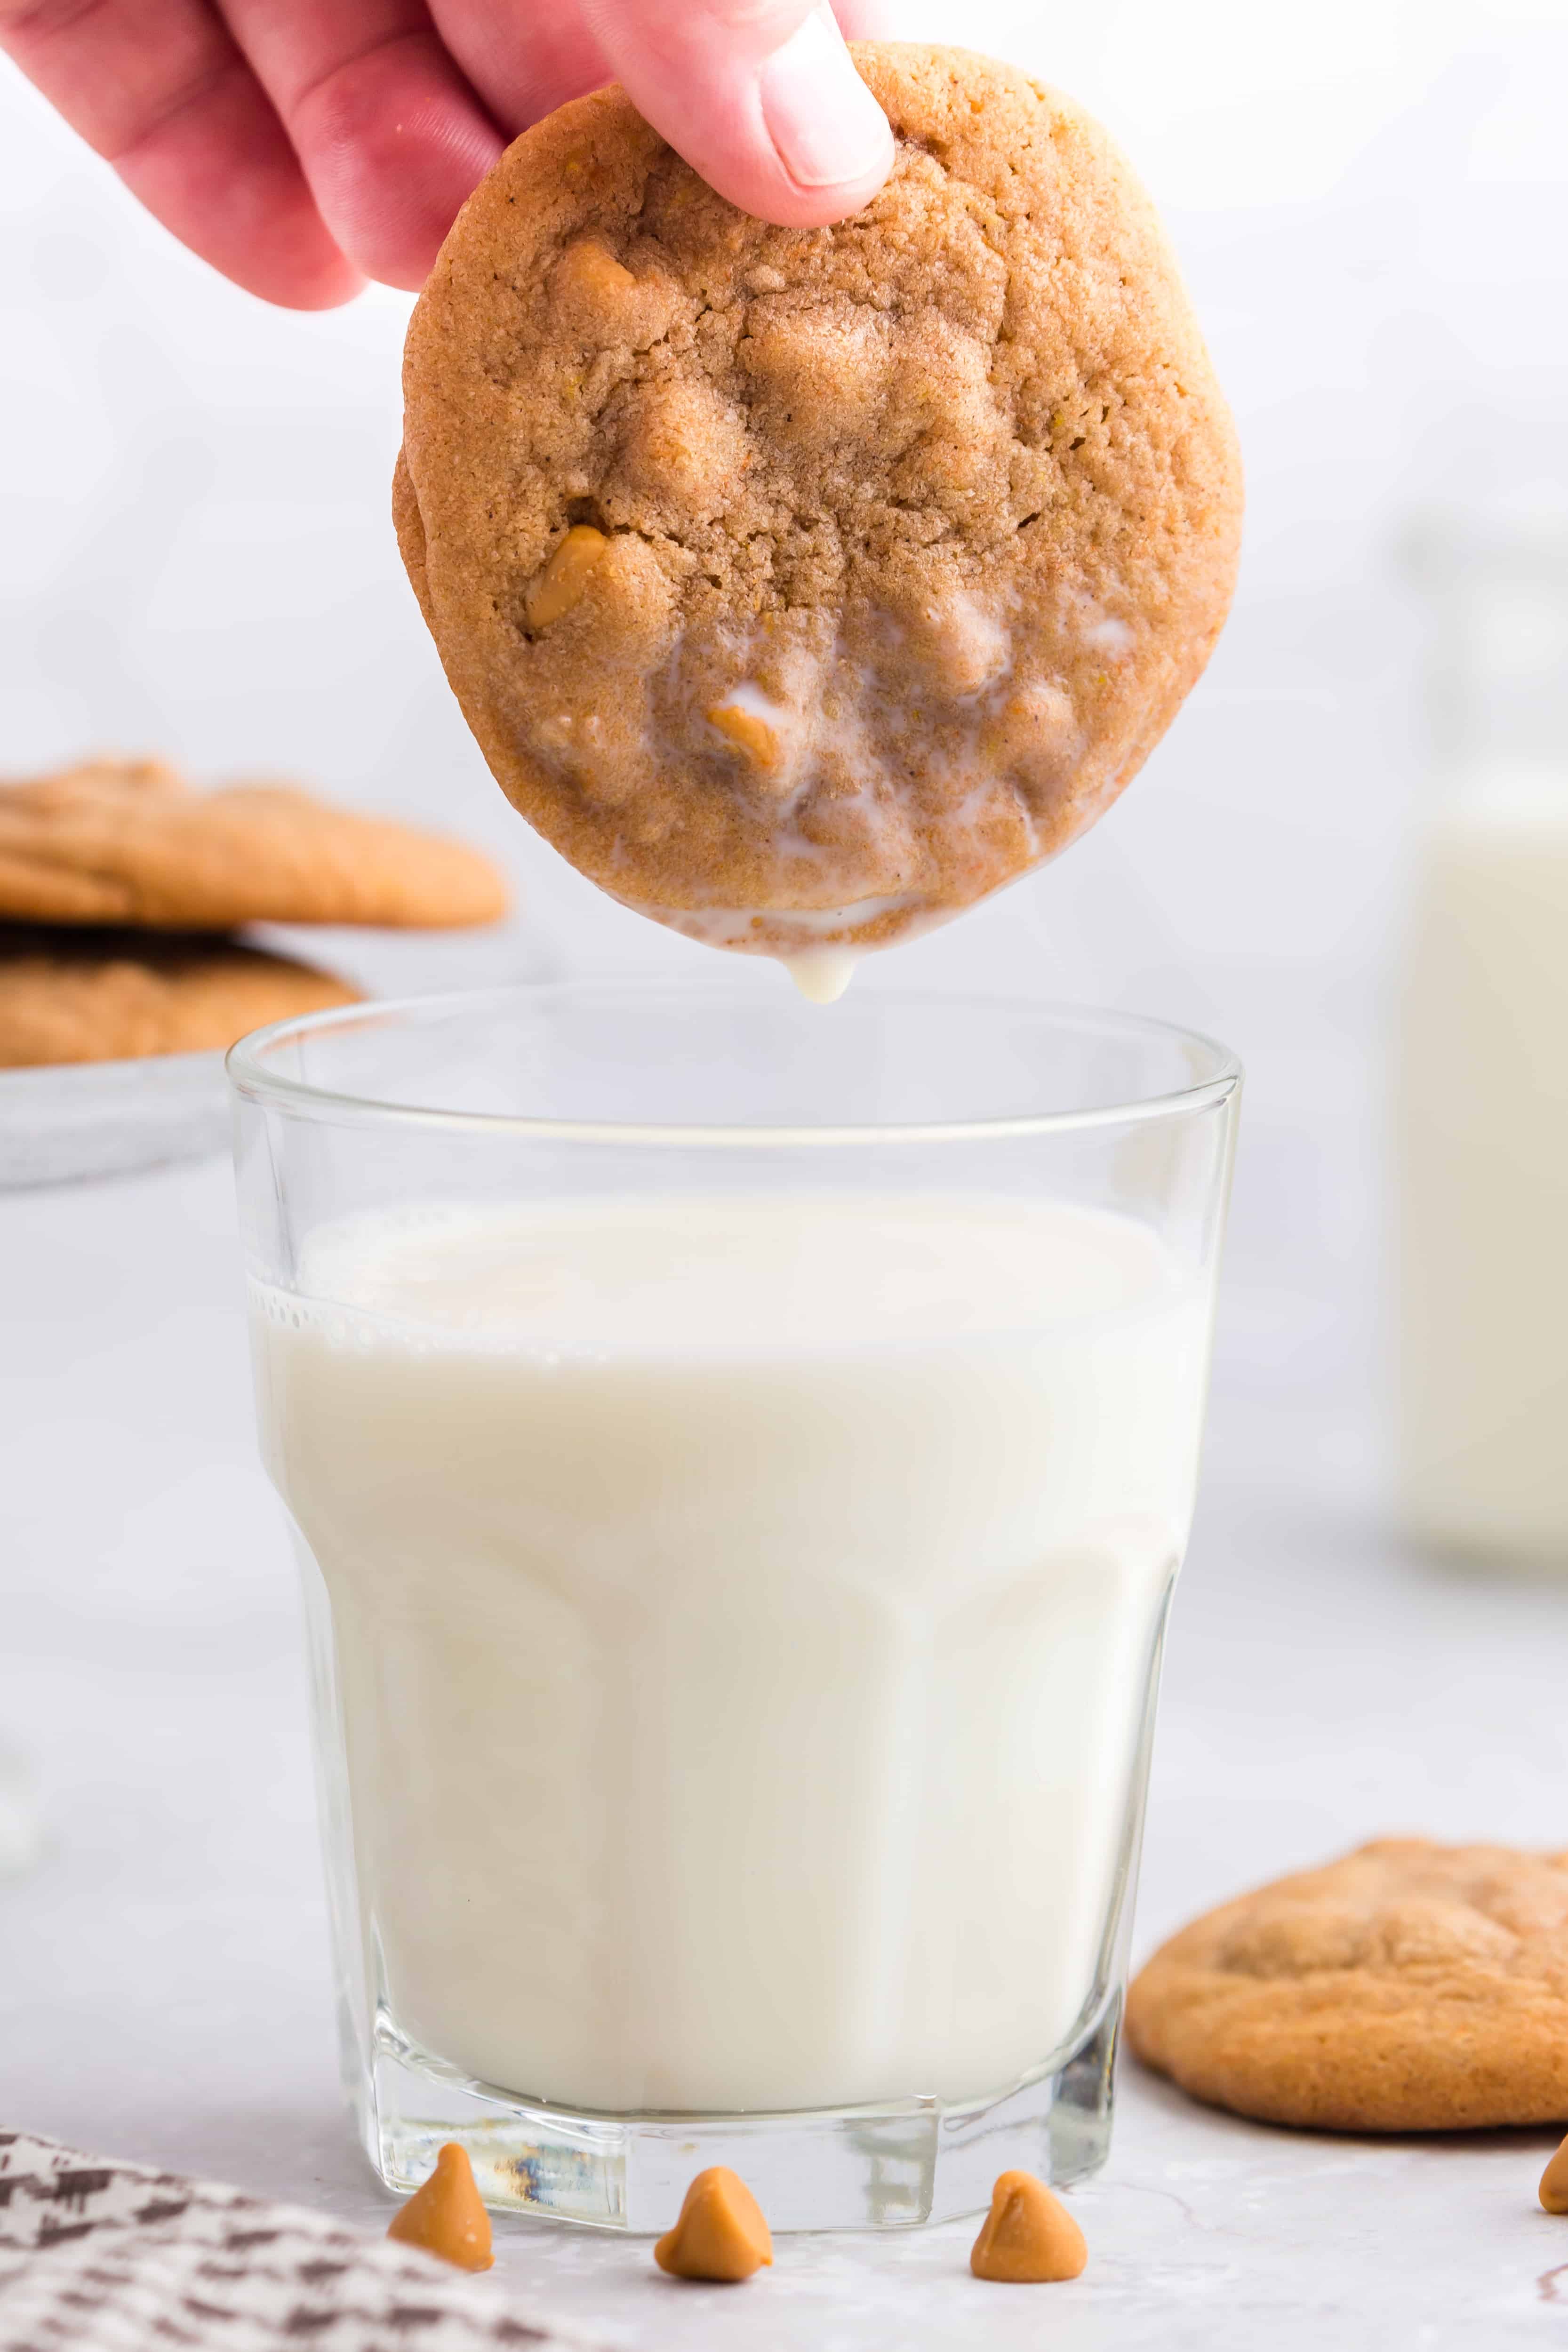 Hand dipping a pumpkin butterscotch cookie into a glass of milk, glass cake stand with cookies, checkered linen, jug of milk, single pumpkin butterscotch cookie with loose butterscotch chips on a grey marble countertop.